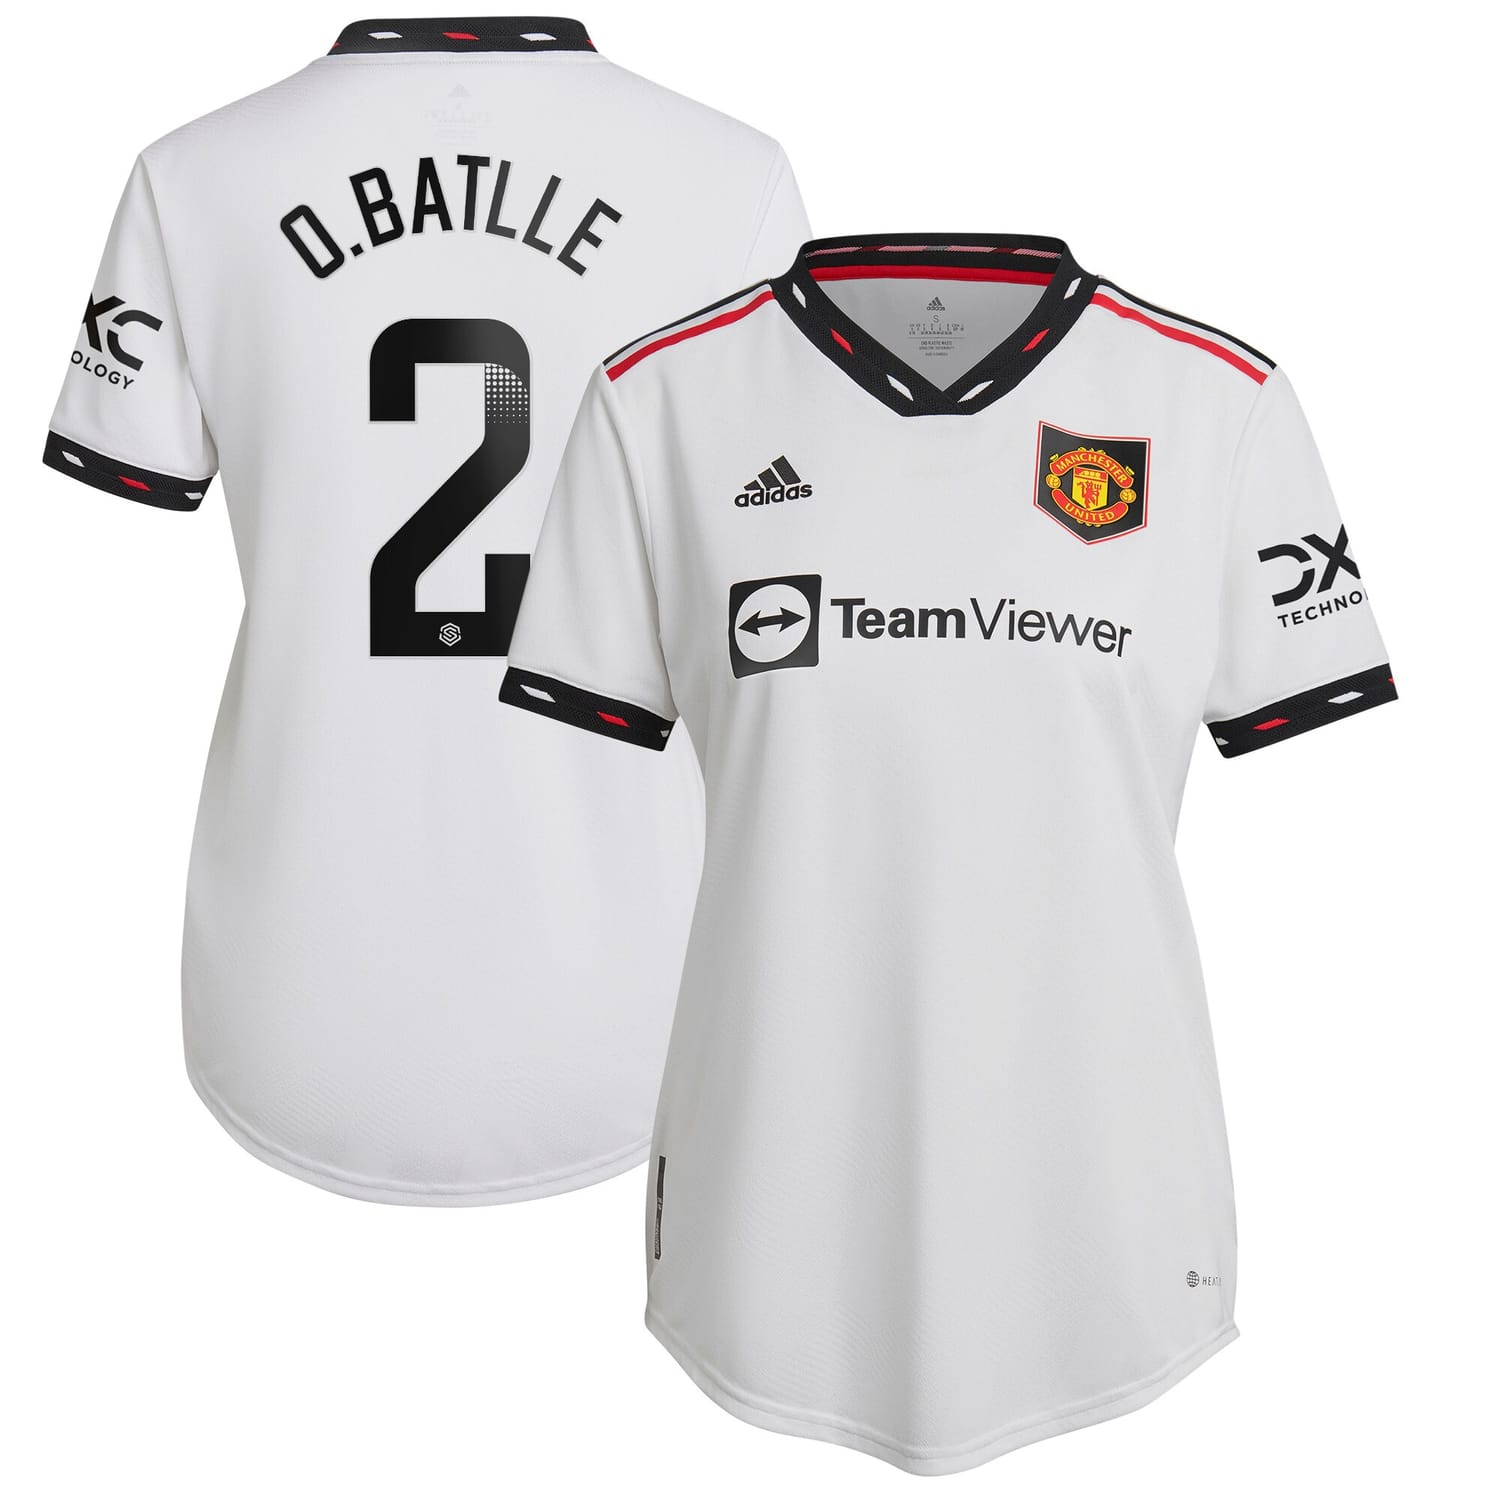 Premier League Manchester United Away WSL Authentic Jersey Shirt 2022-23 player Ona Batlle 2 printing for Women